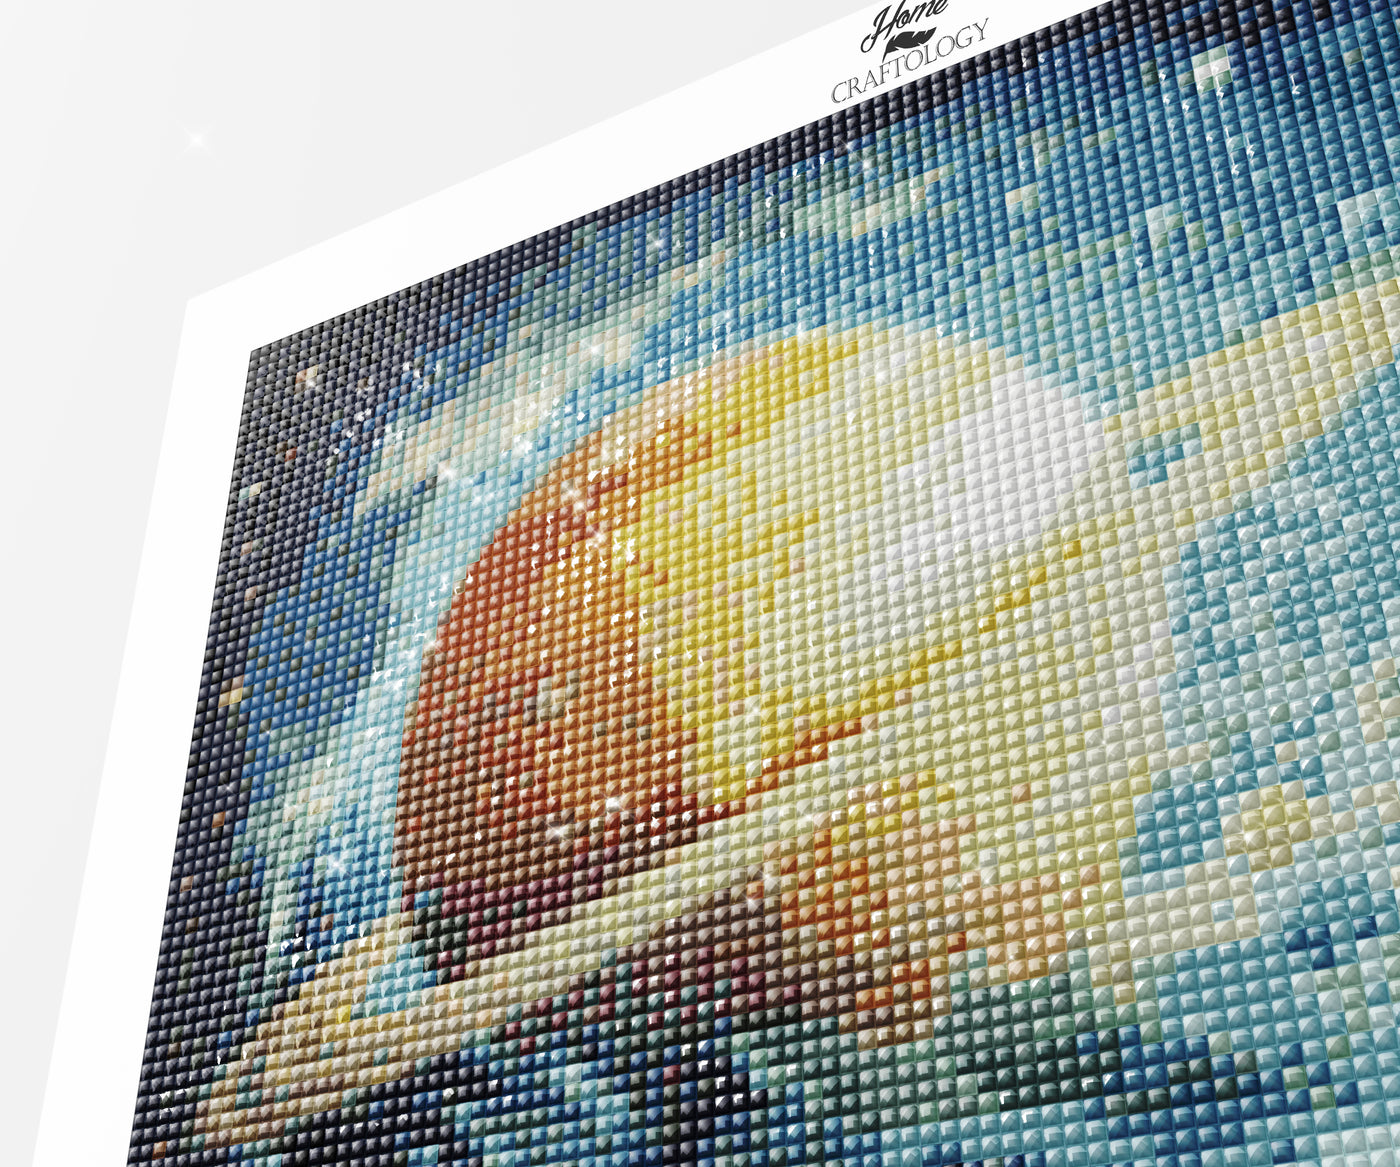 Saturn with Other Planets - Premium Diamond Painting Kit